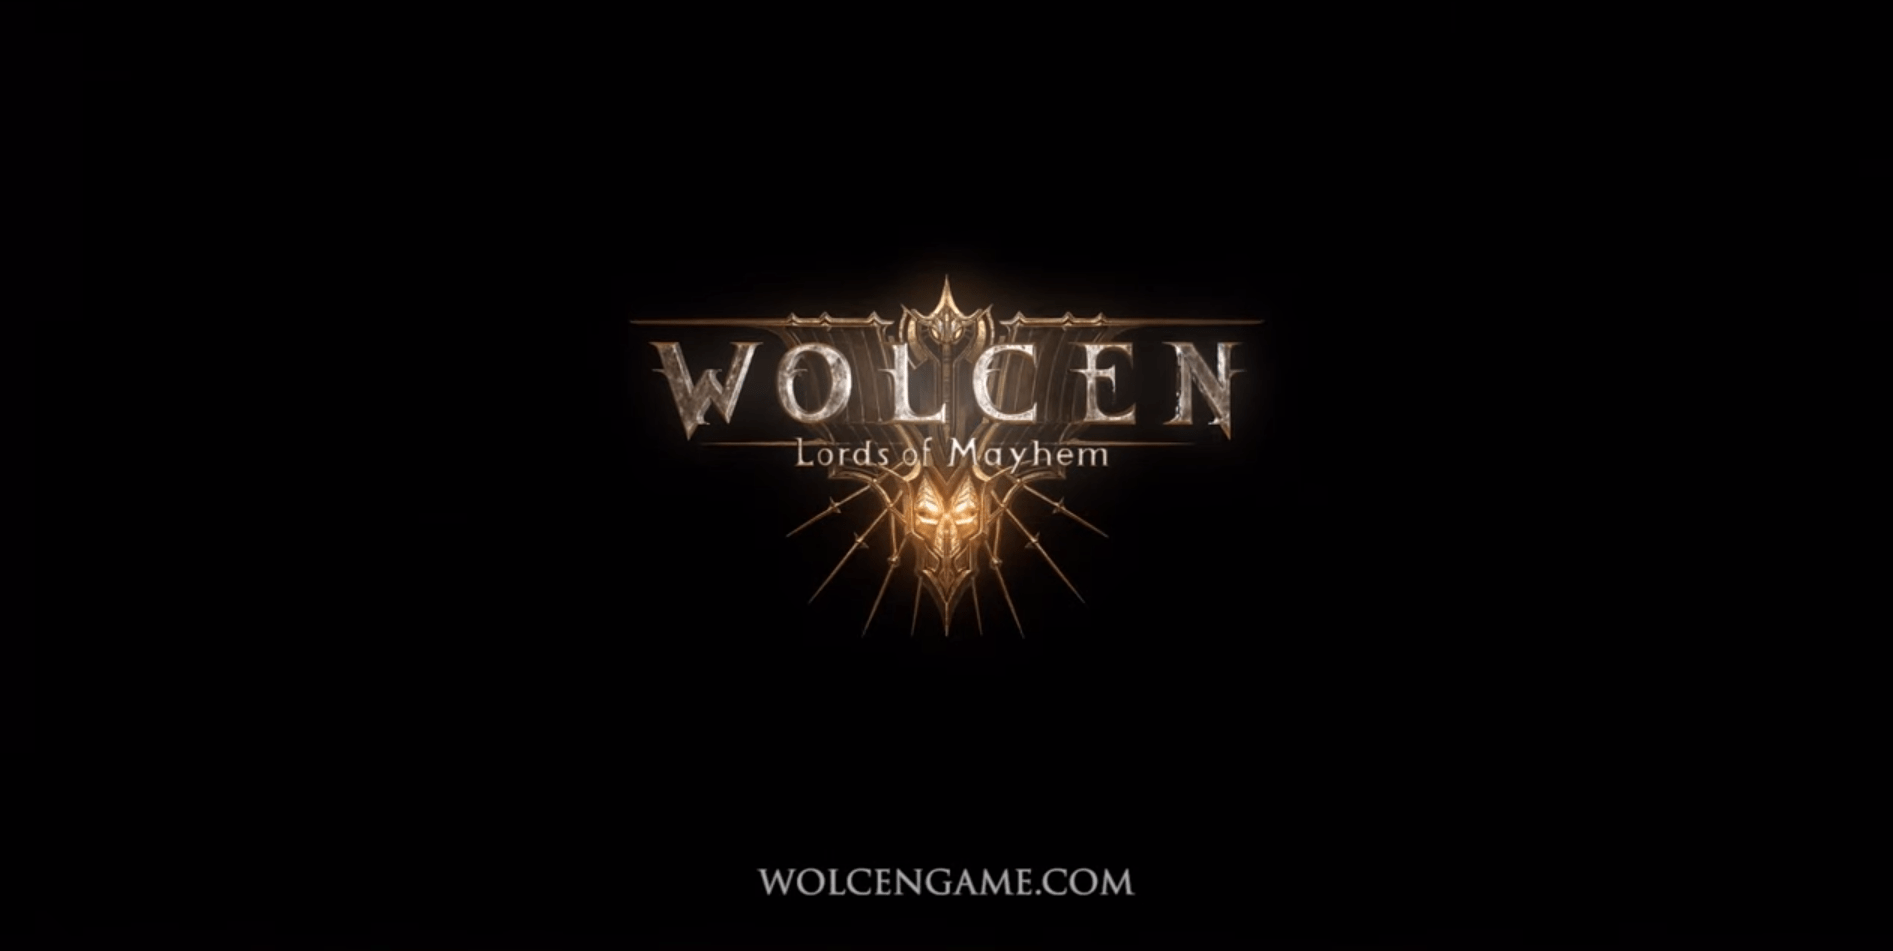 Wolcen: Lords Of Mayhem Set On Schedule For February 13th Full Game Release